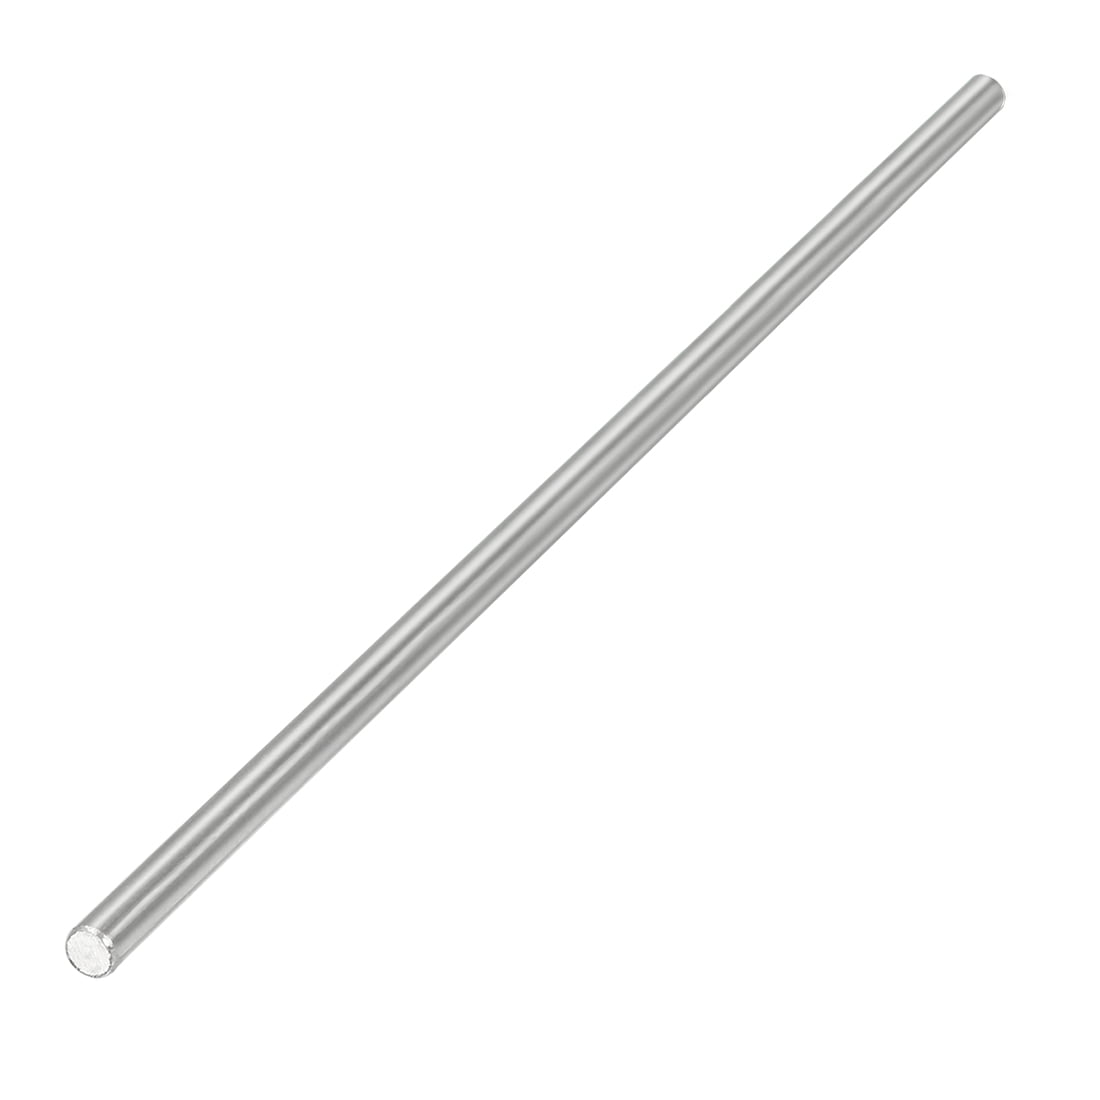 uxcell Round Shaft Rod Axle 304 Stainless Steel 2mm x 110mm for RC Toy Car 